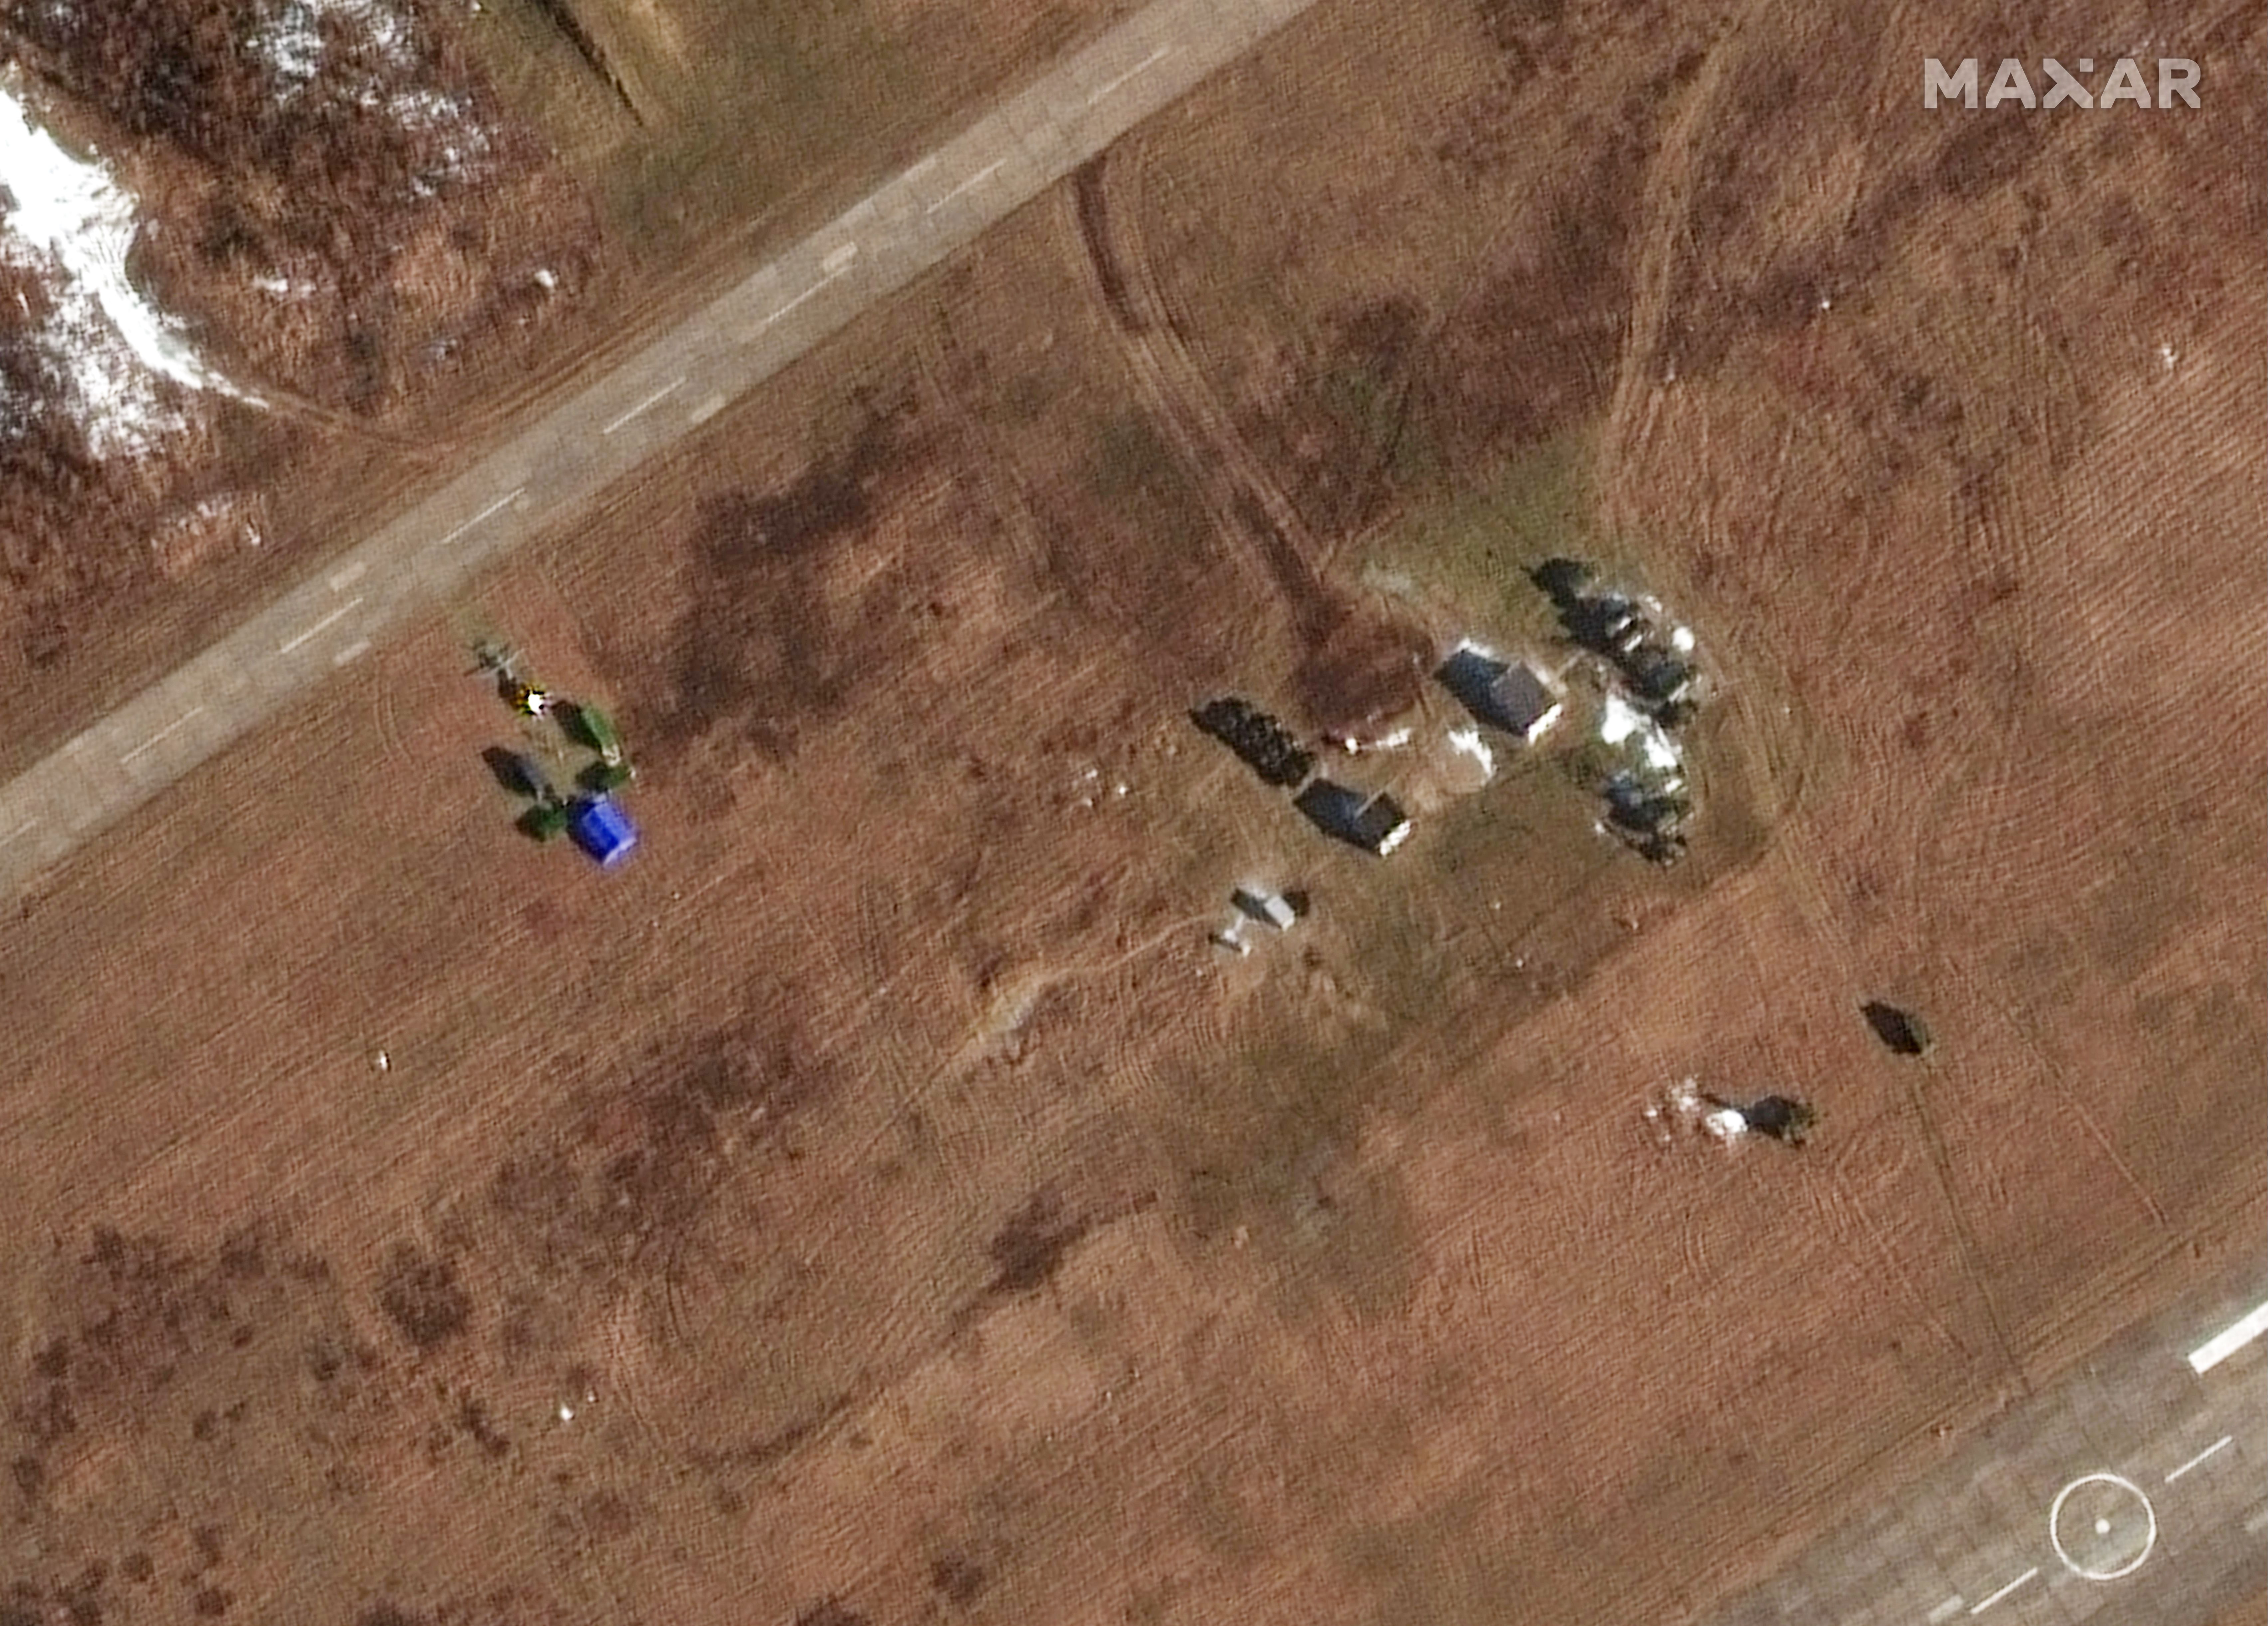 Drone technology at Luninets Air Base in Belarus, observed on Feb. 14, 2022.